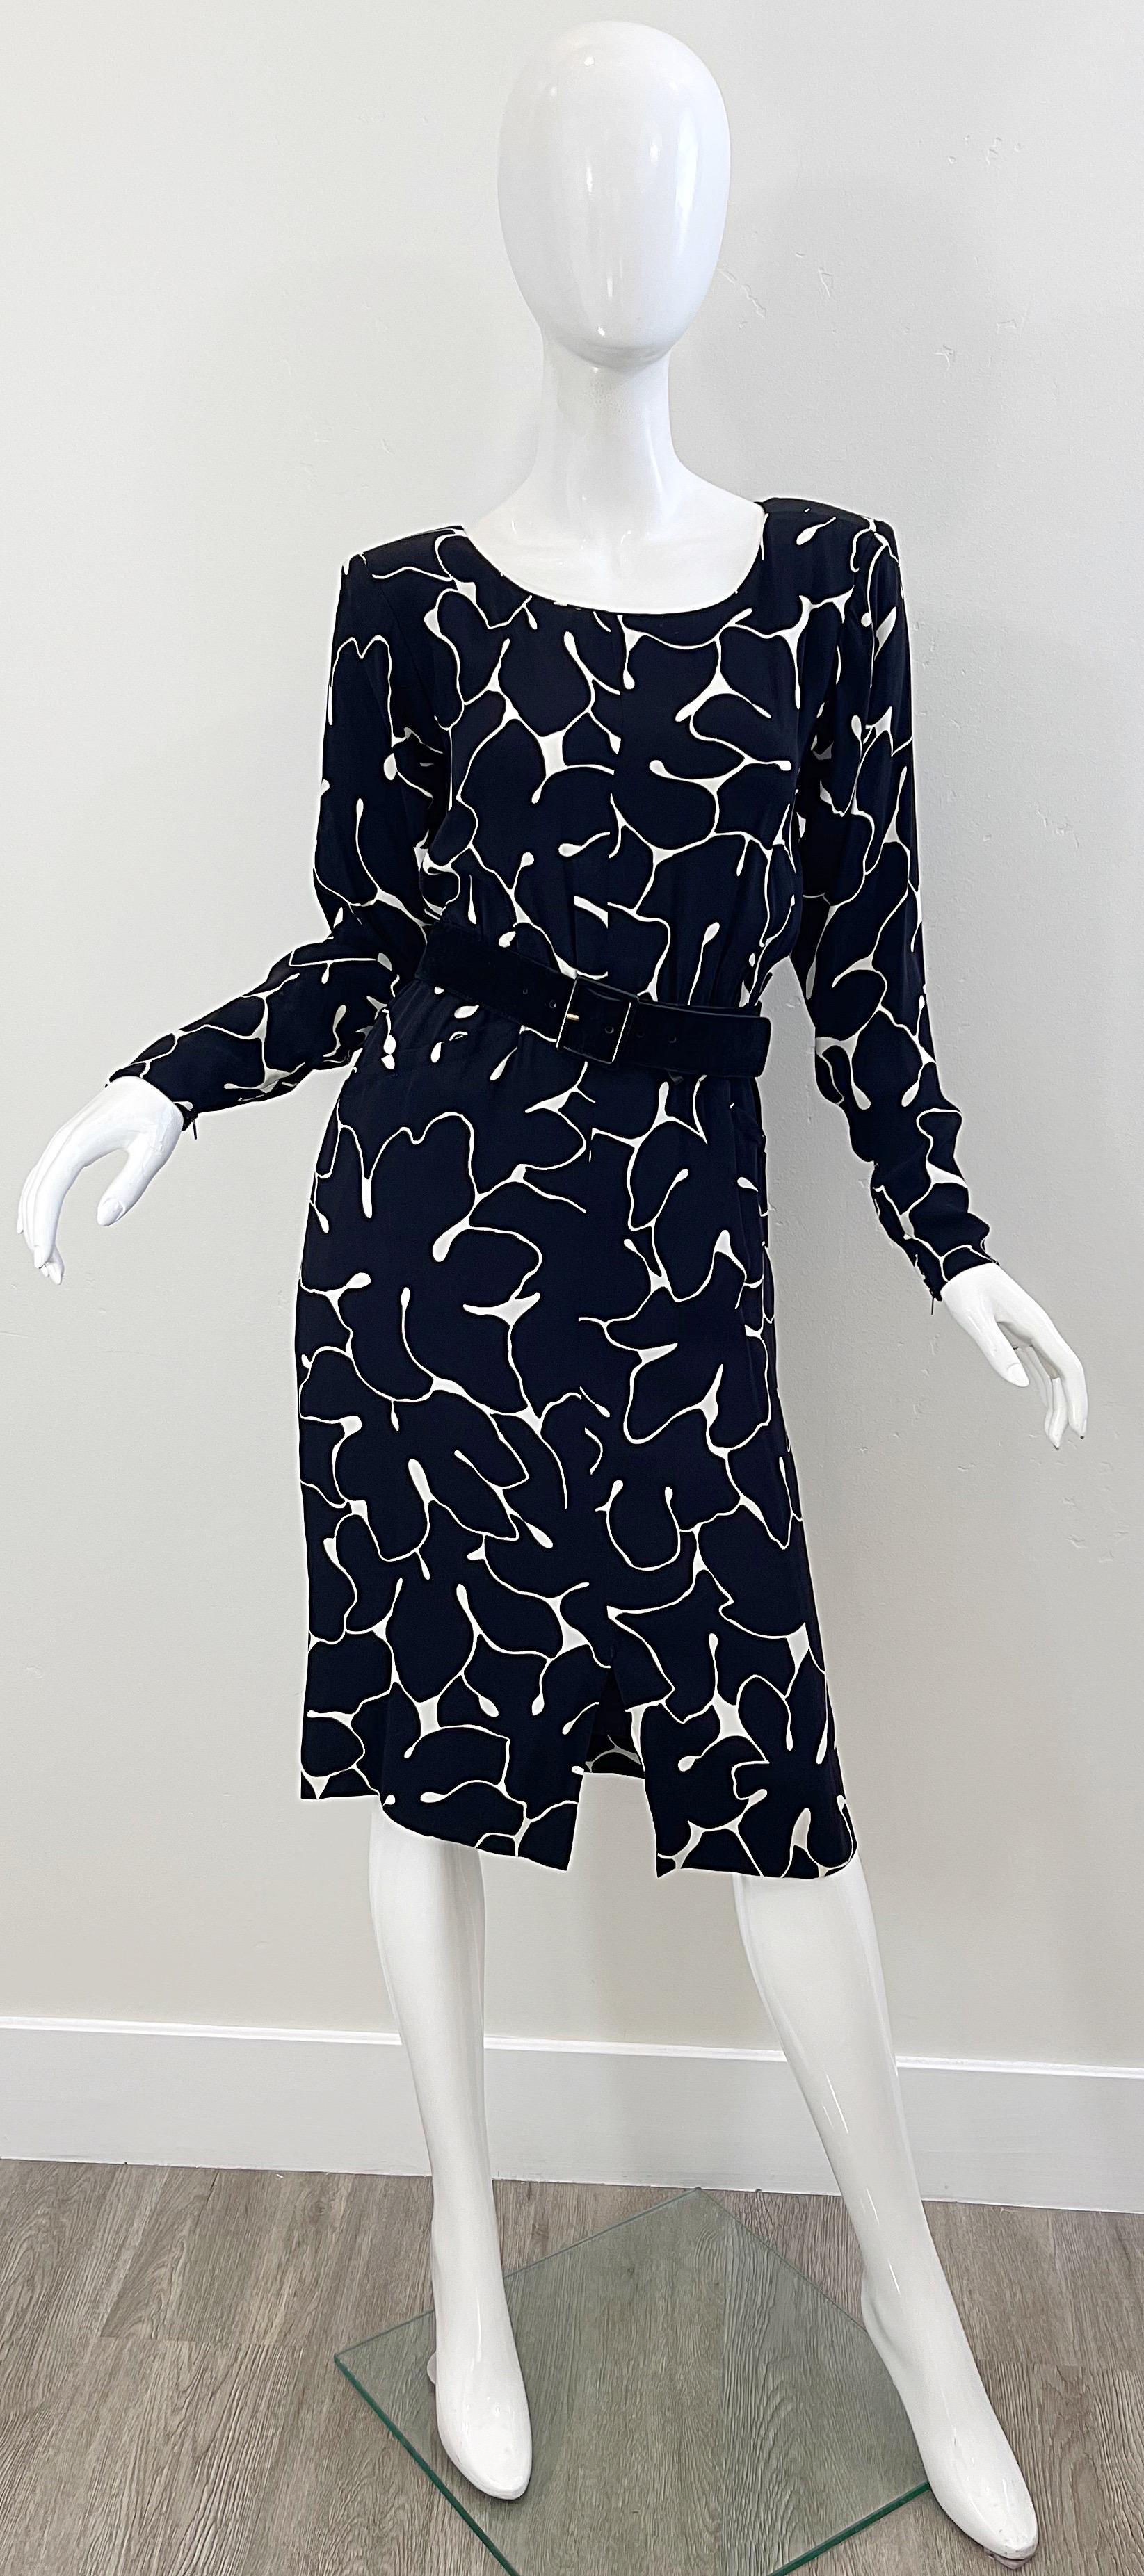 Yves Saint Laurent 1980s Black and White Abstract Flower Print Silk Crepe Dress For Sale 9